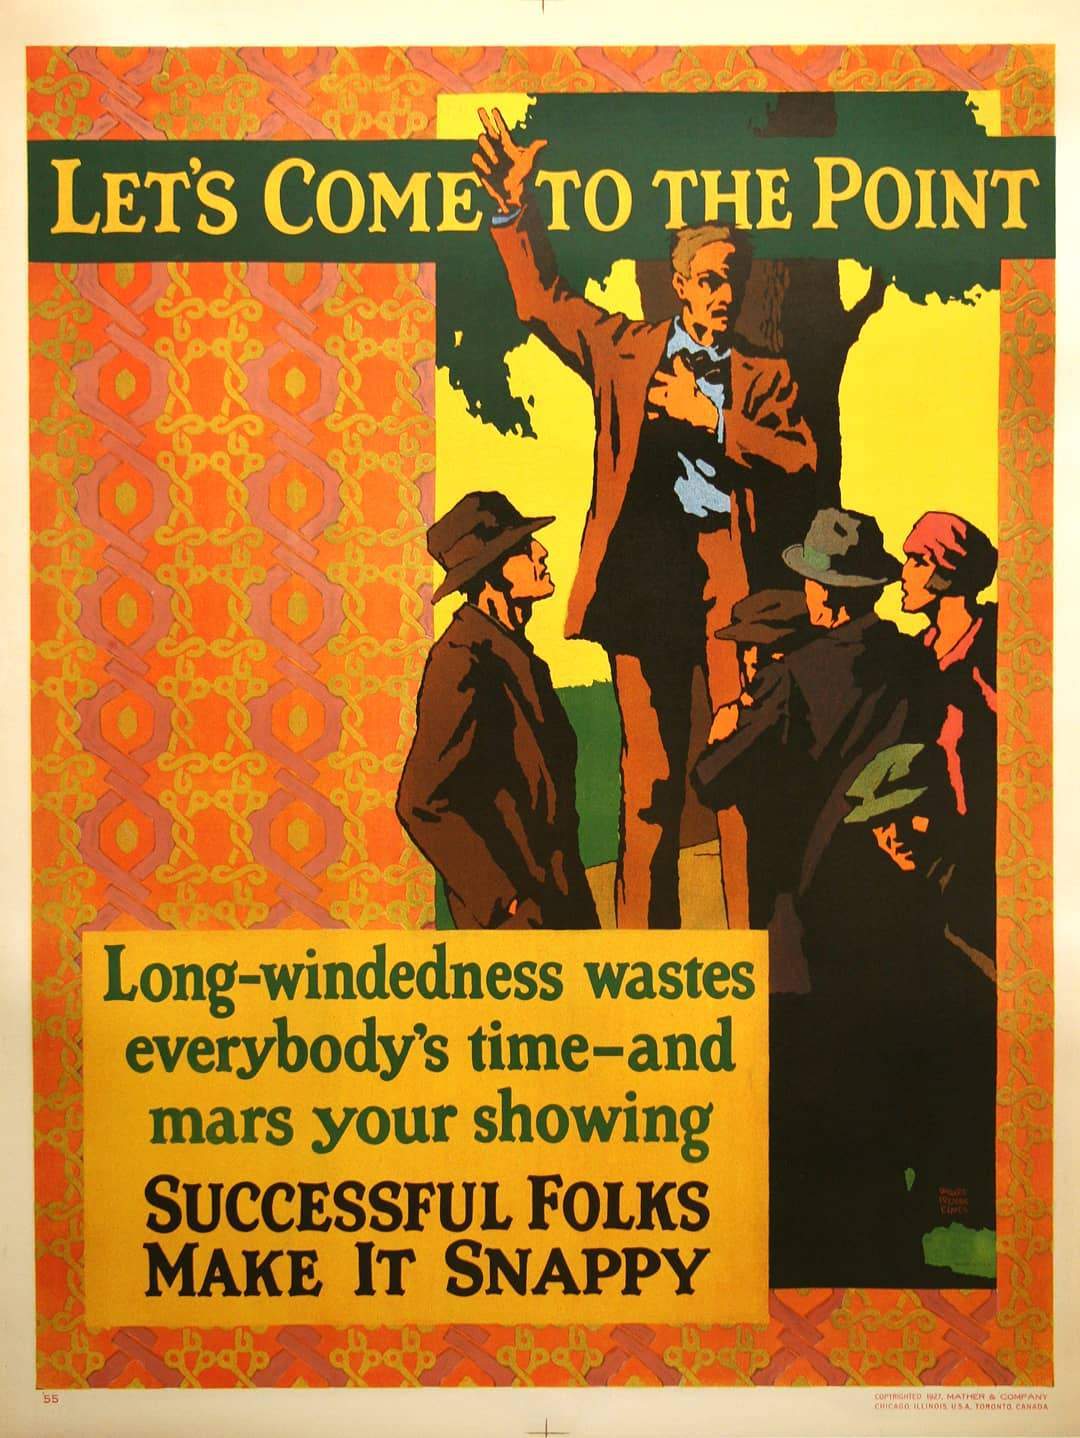 Original Mather Work Incentive Poster 1927 by Elmes - Let's Come to the Point